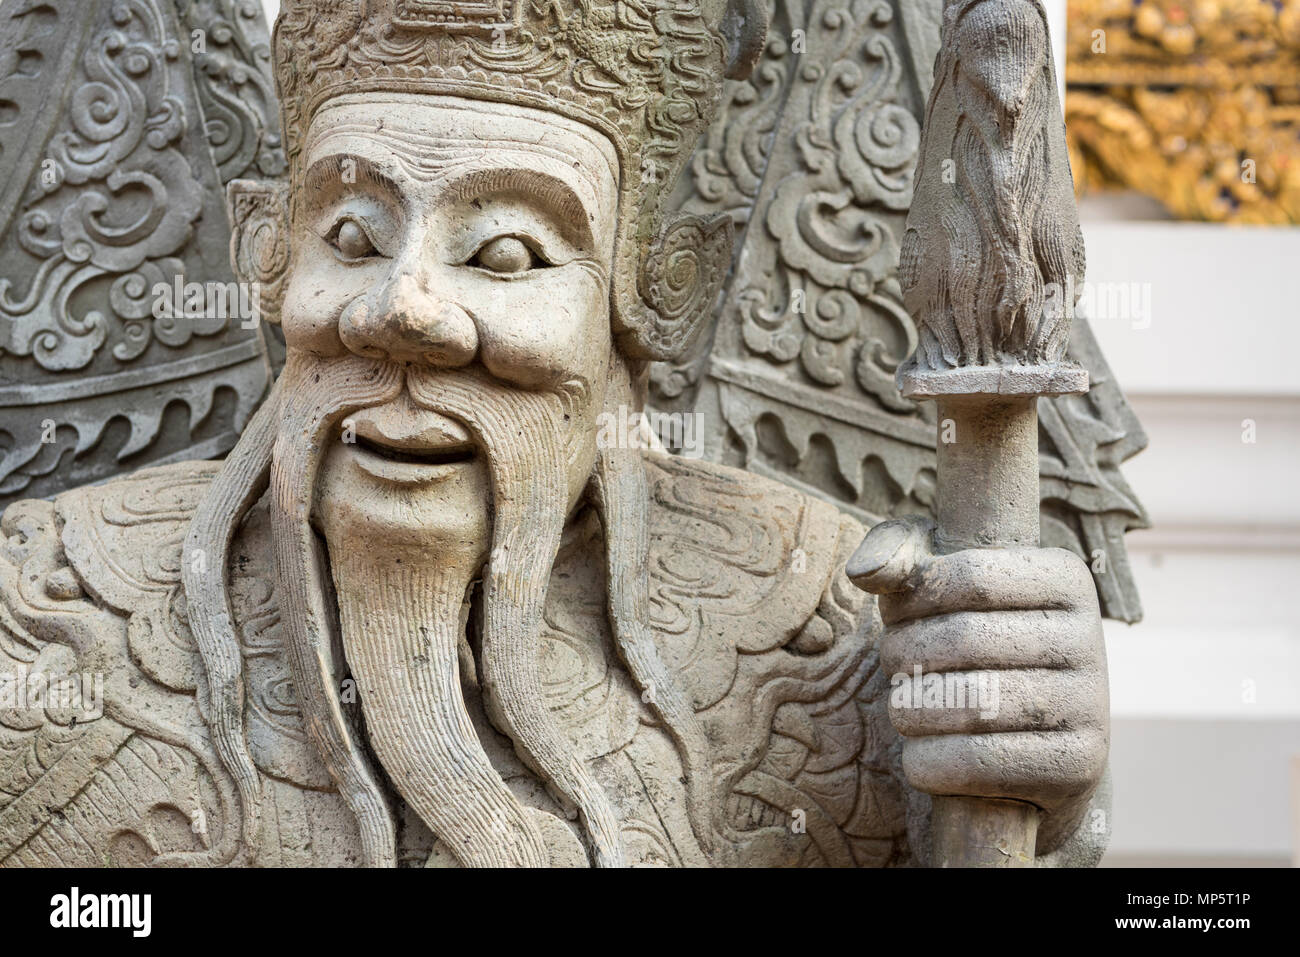 The face of a stone carving in the grounds of the Wat Pho (the Temple of the Reclining Buddha), or Wat Phra Chetuphon Bangkok Thailand Stock Photo